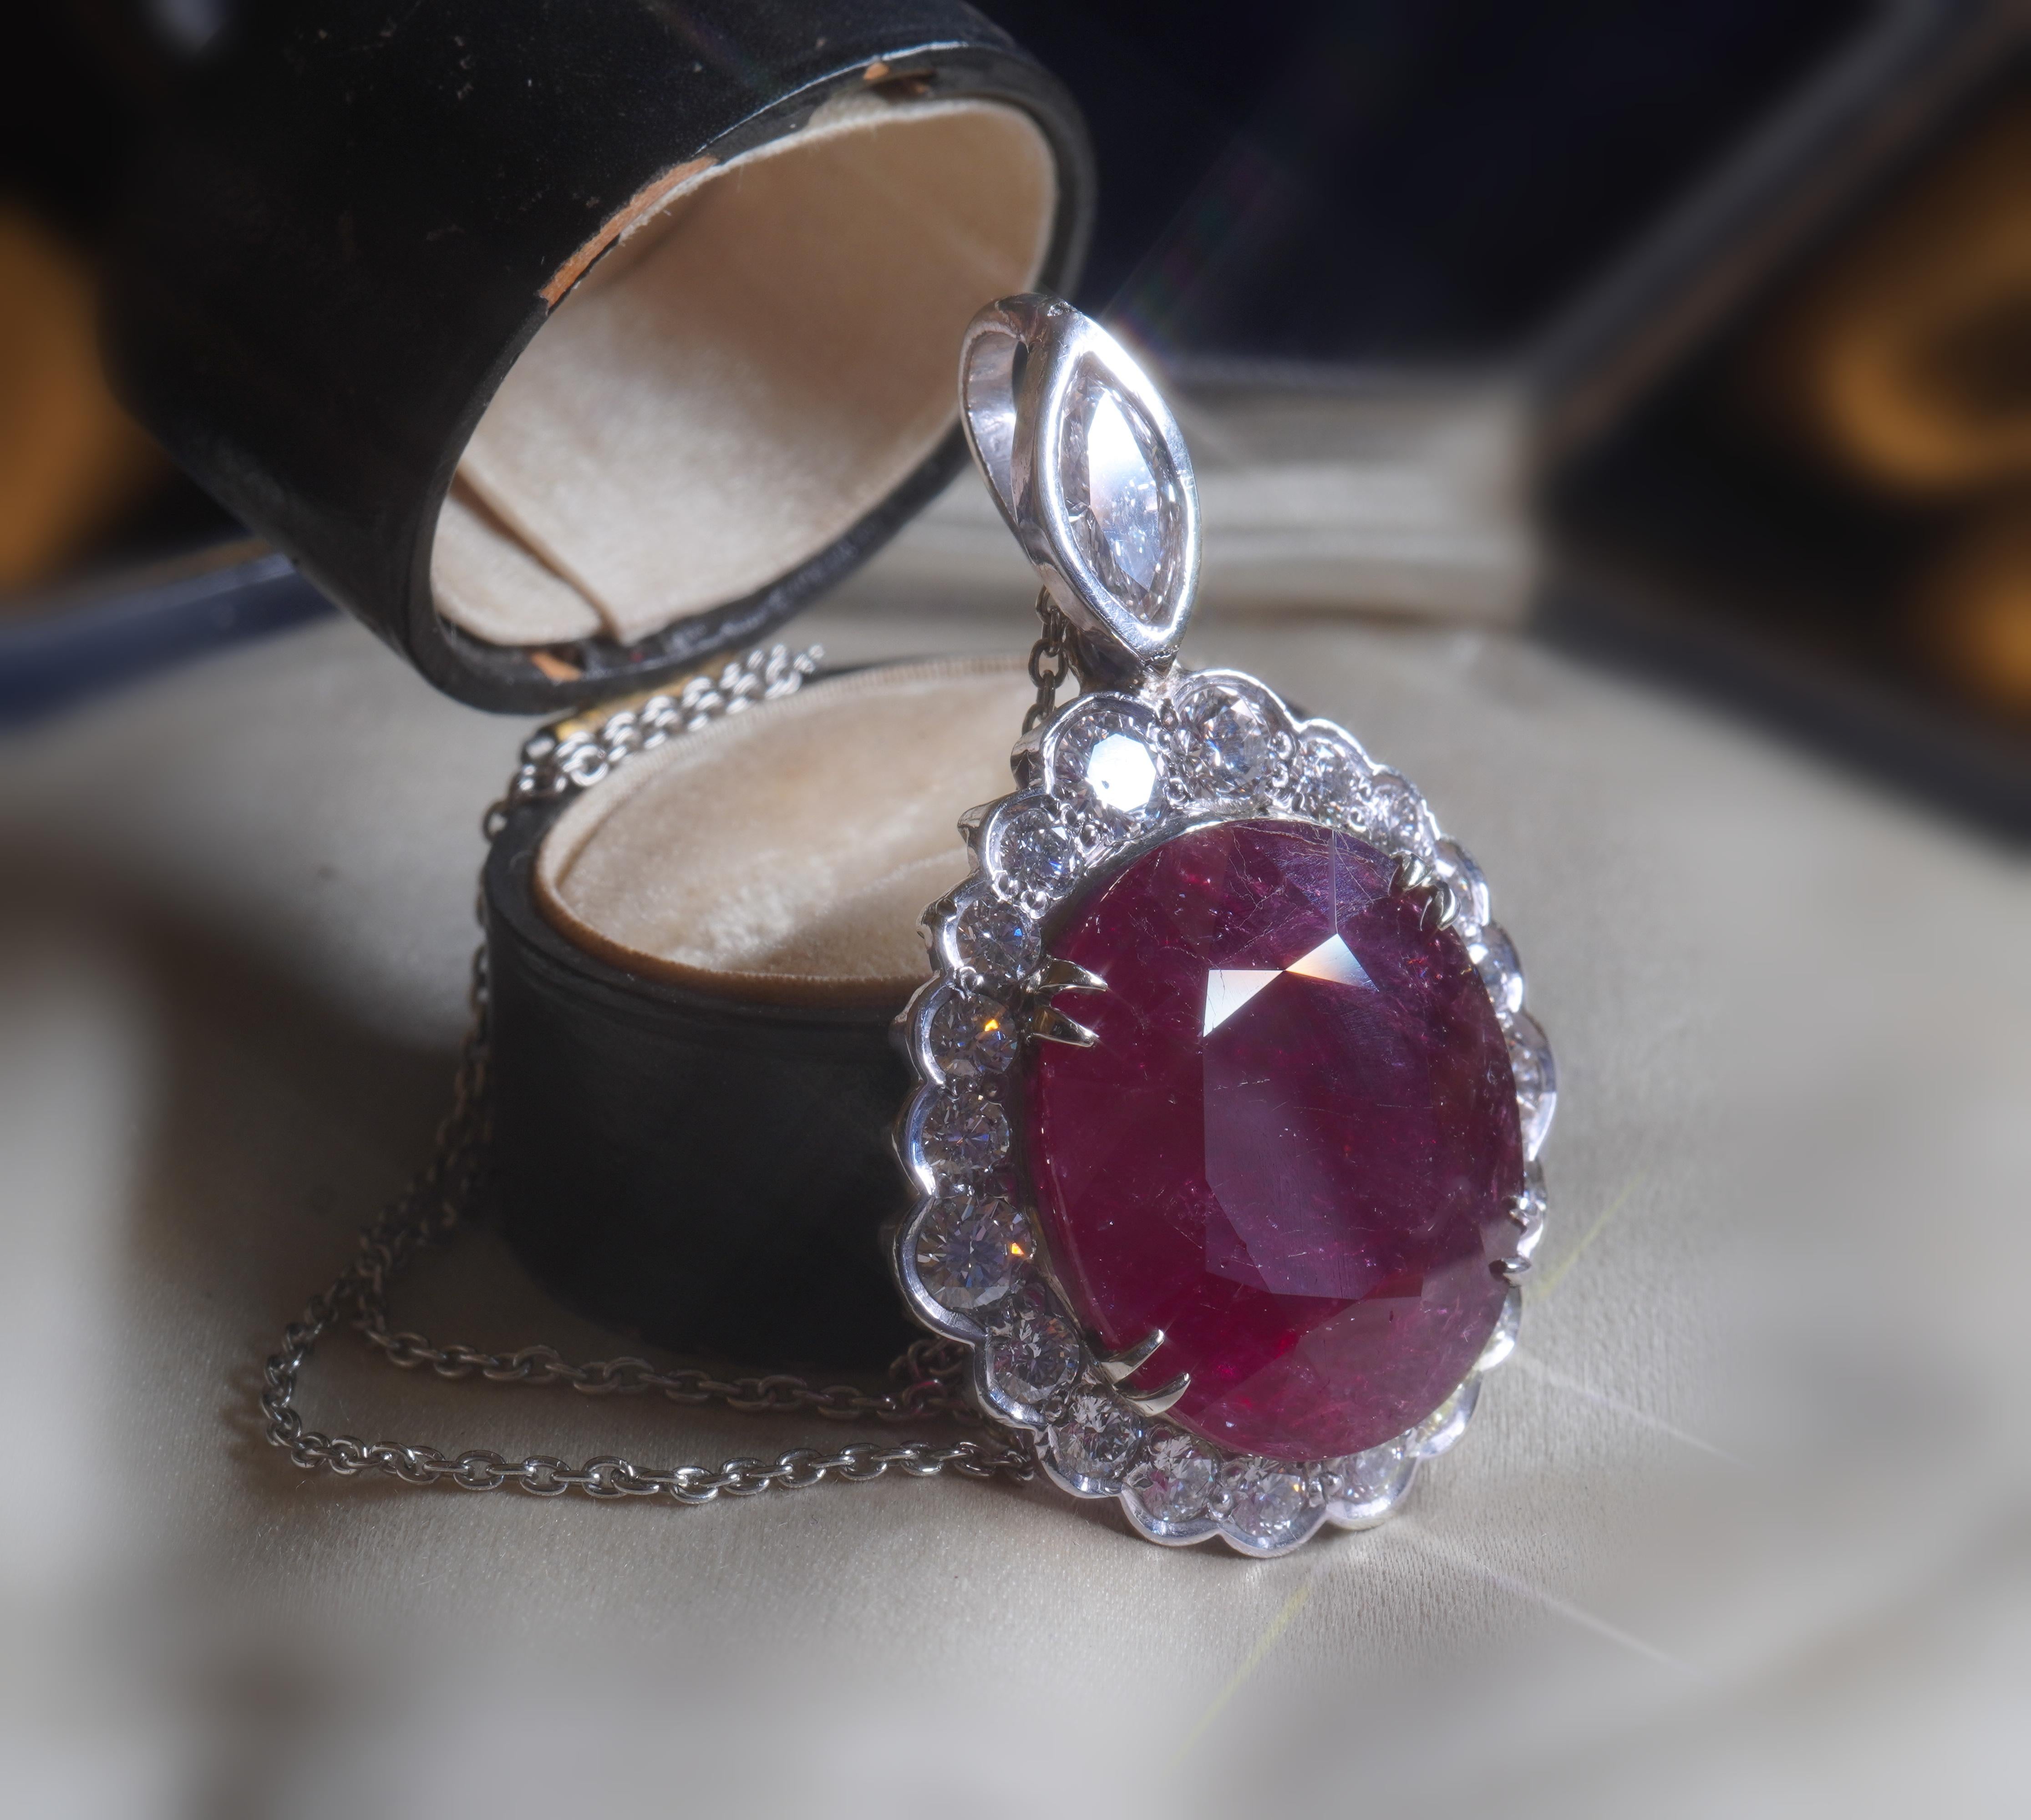 Old South Jewels proudly presents....LUXURY.   GIA ANTIQUE PLATINUM NO HEAT RUBY

DIAMOND 22.74 CARAT VINTAGE PENDANT!  Giant 18.42 Carat Rich Red Ruby!

Crowned With 4.32 Carats of Sparkling Diamonds White Eye Clean Big Diamonds.  Beautiful .50